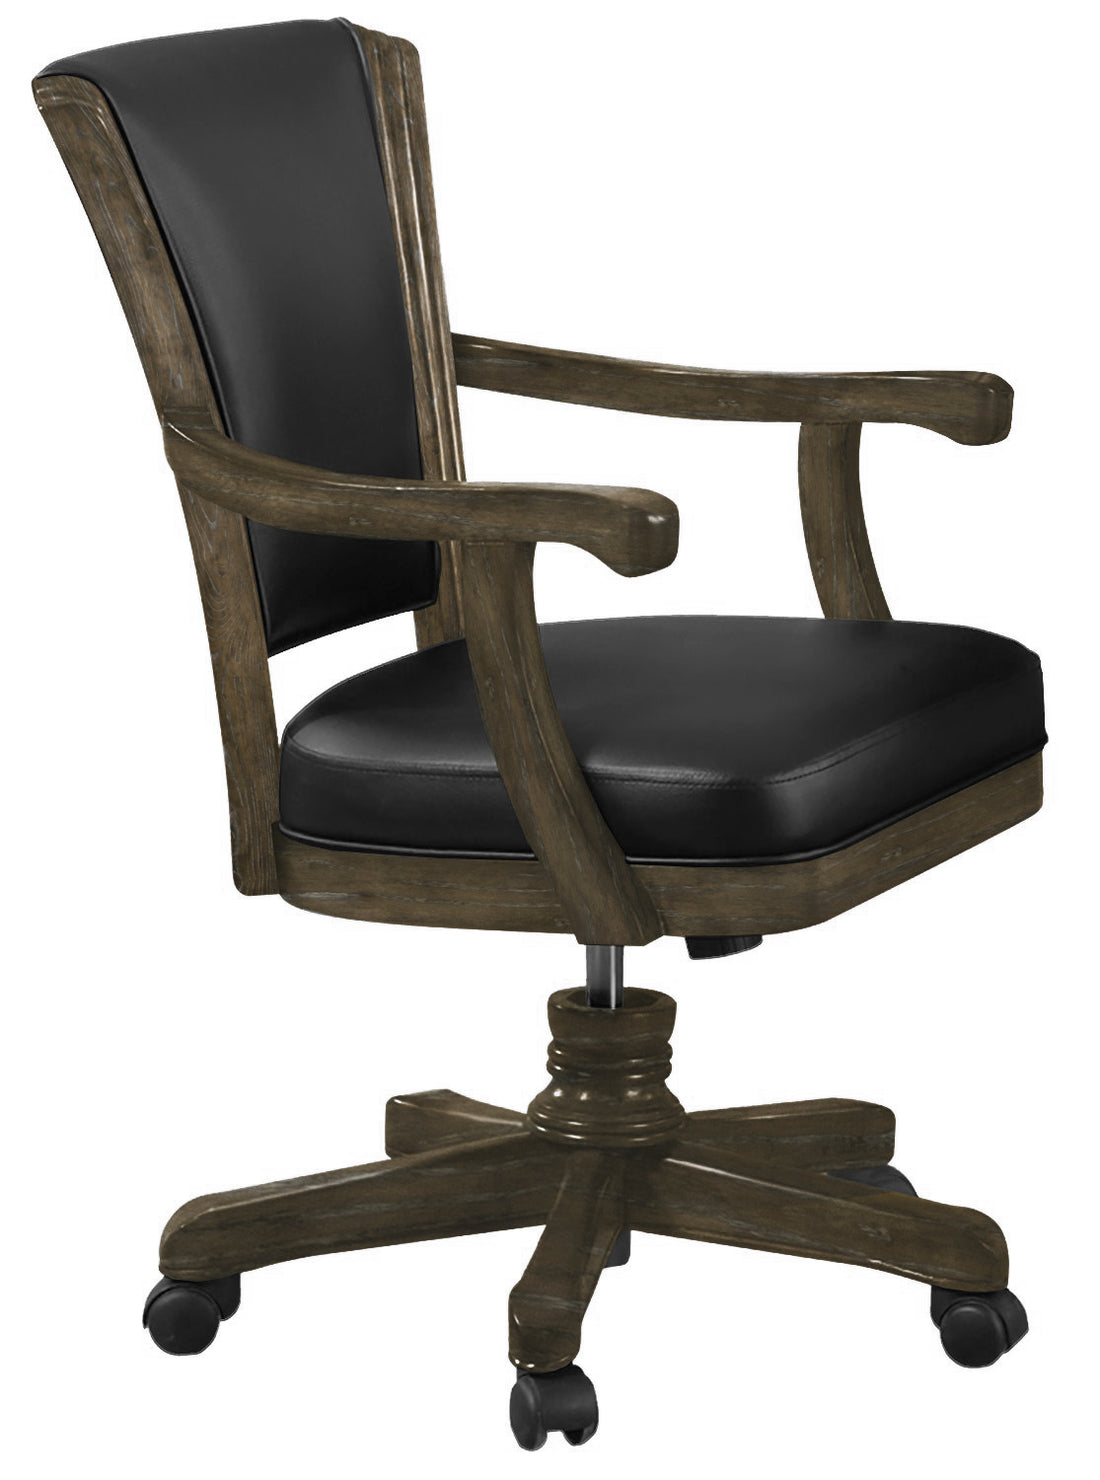 Legacy Billiards Elite Gas Lift Game Chair in Smoke Finish - Primary Image